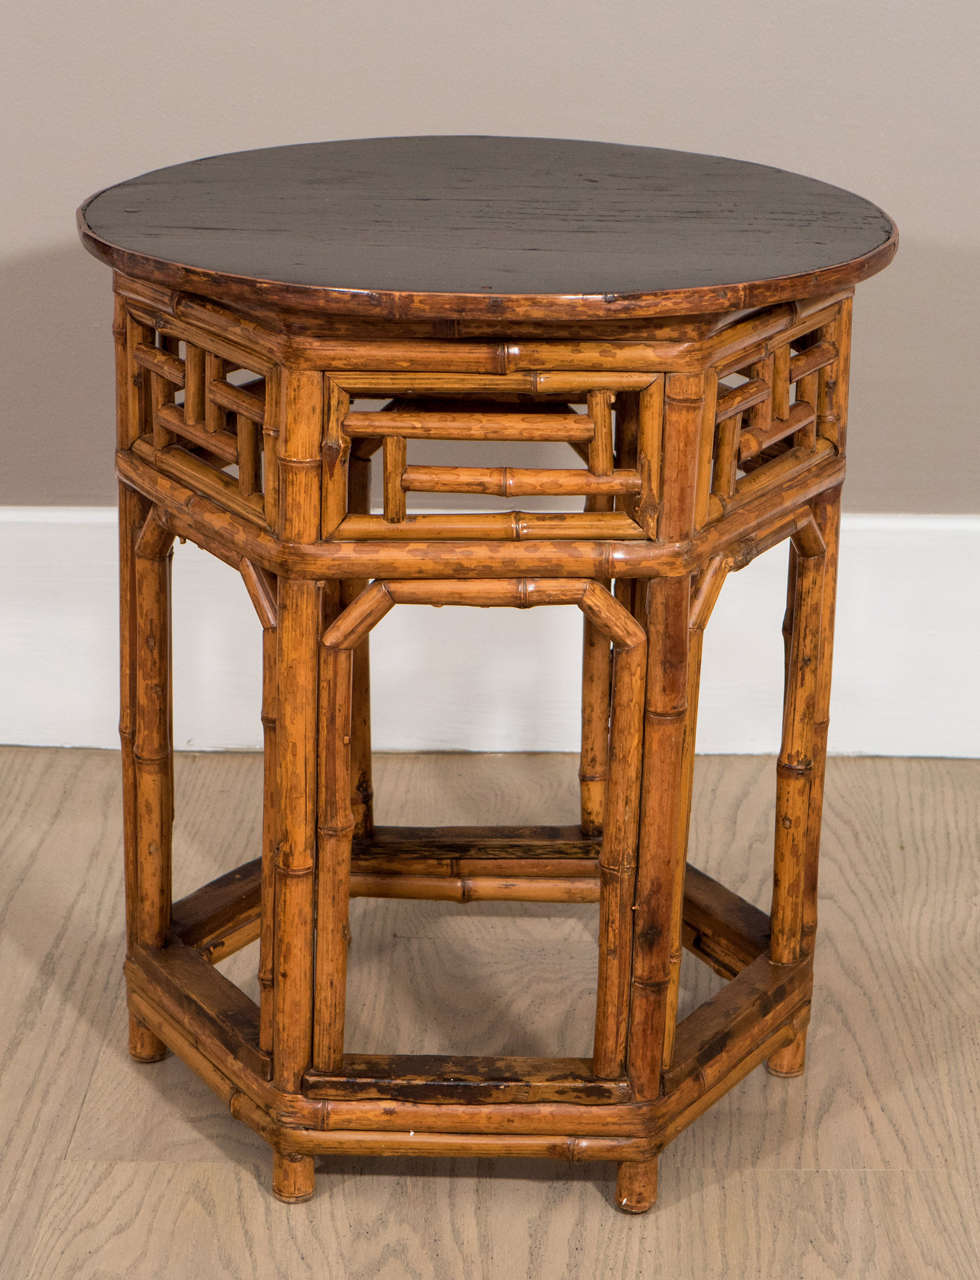 Pair of bamboo low tables with ebonised tops with bamboo edge, supported by hexagonal bases. Late 19th or early 20th century.